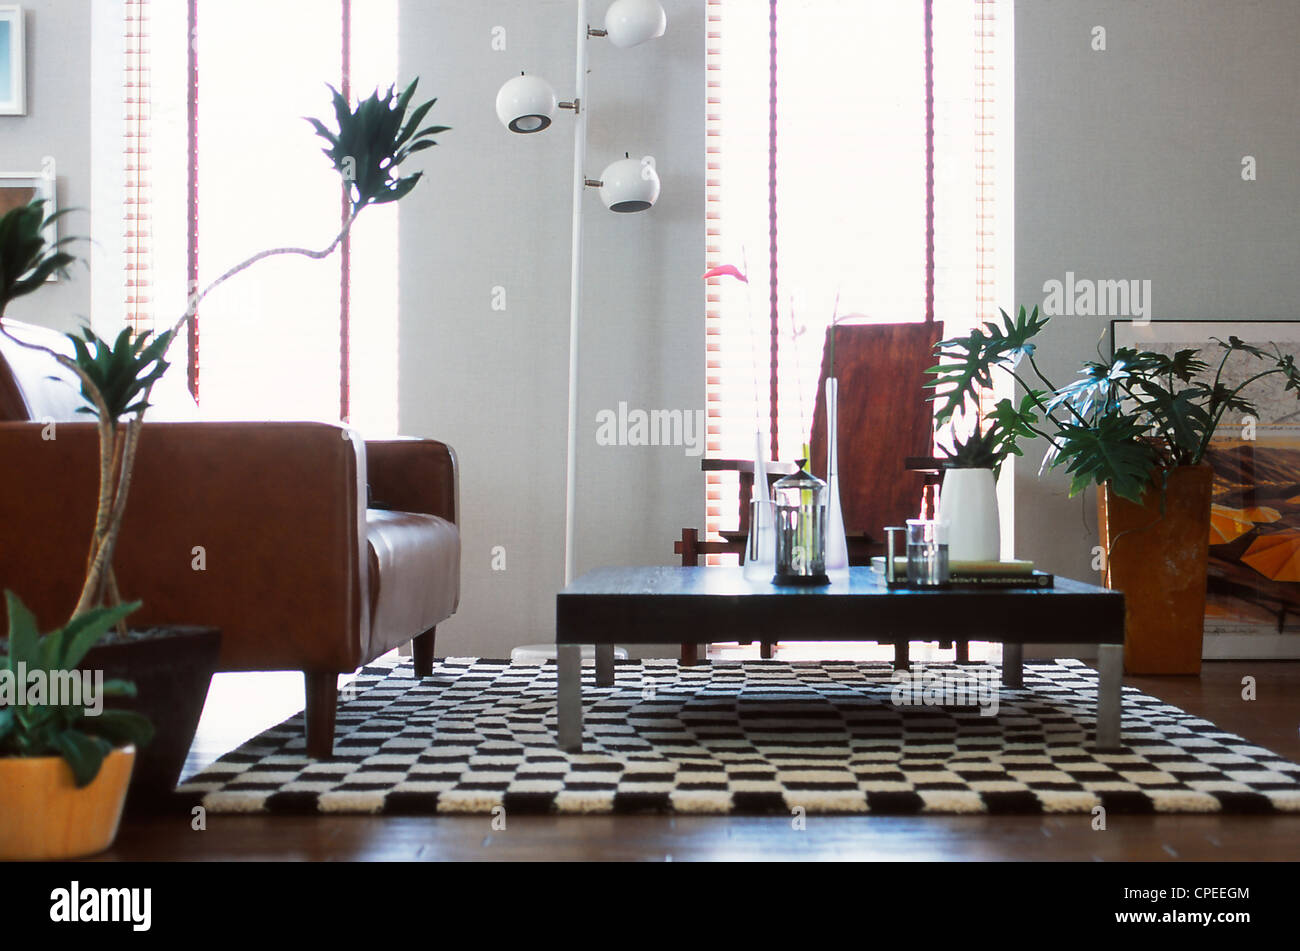 Easy Chair And Coffee Table In Sitting Room Stock Photo